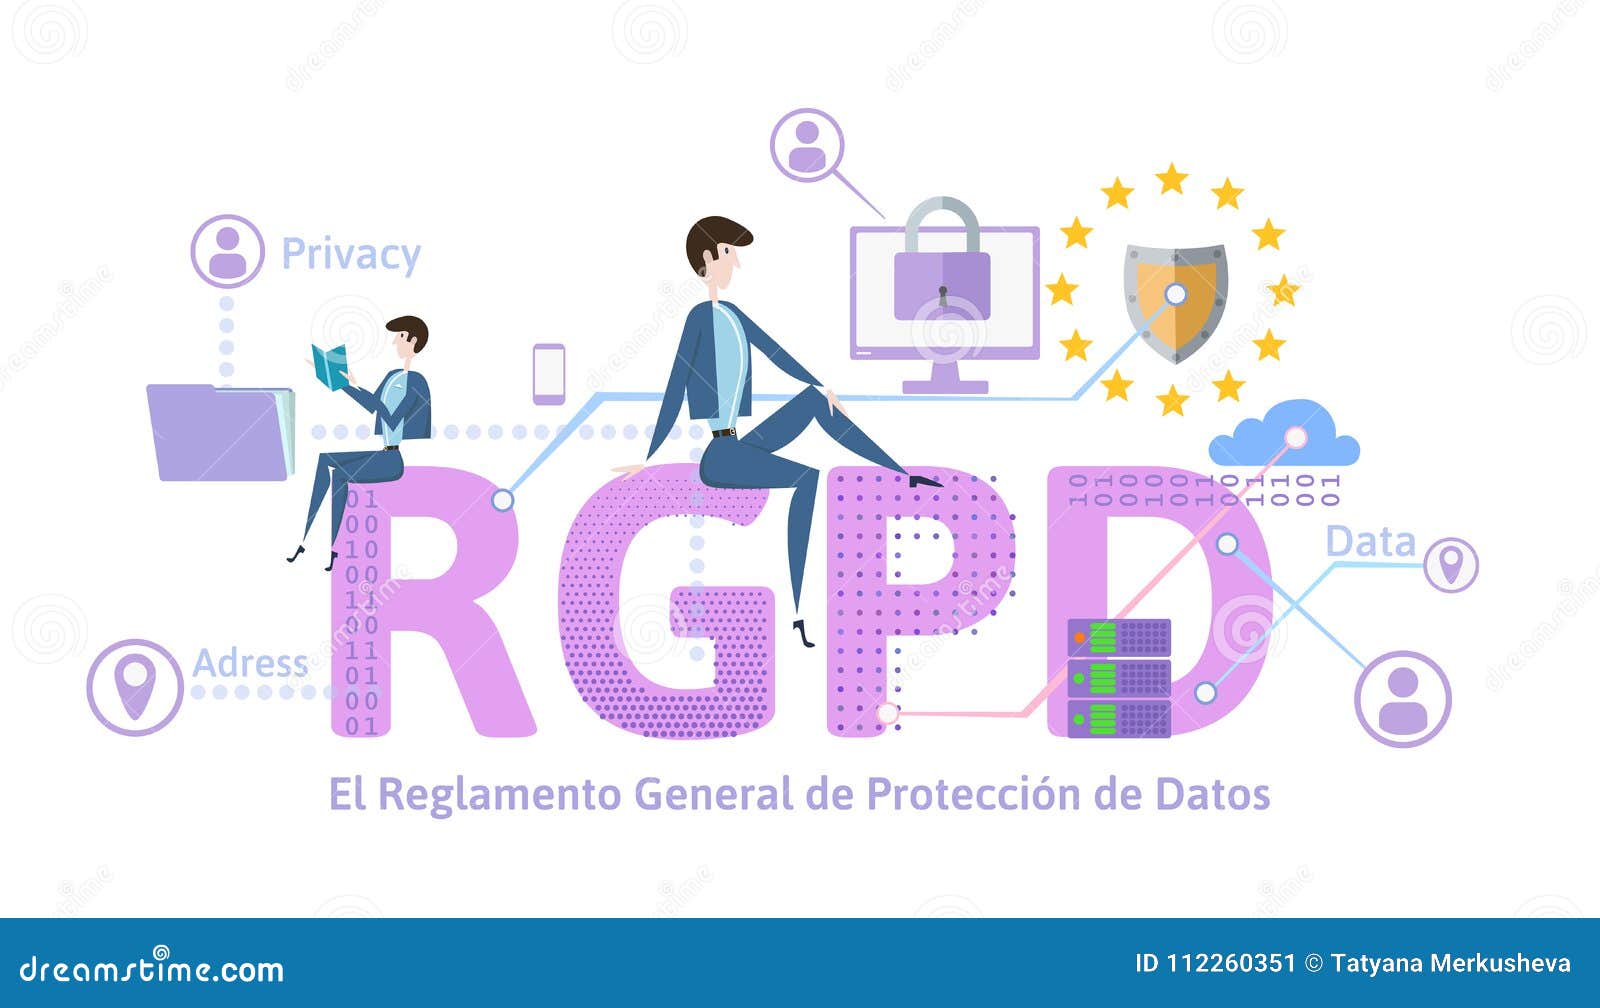 rgpd, spanish and italian version version of gdpr. general data protection regulation. concept . the